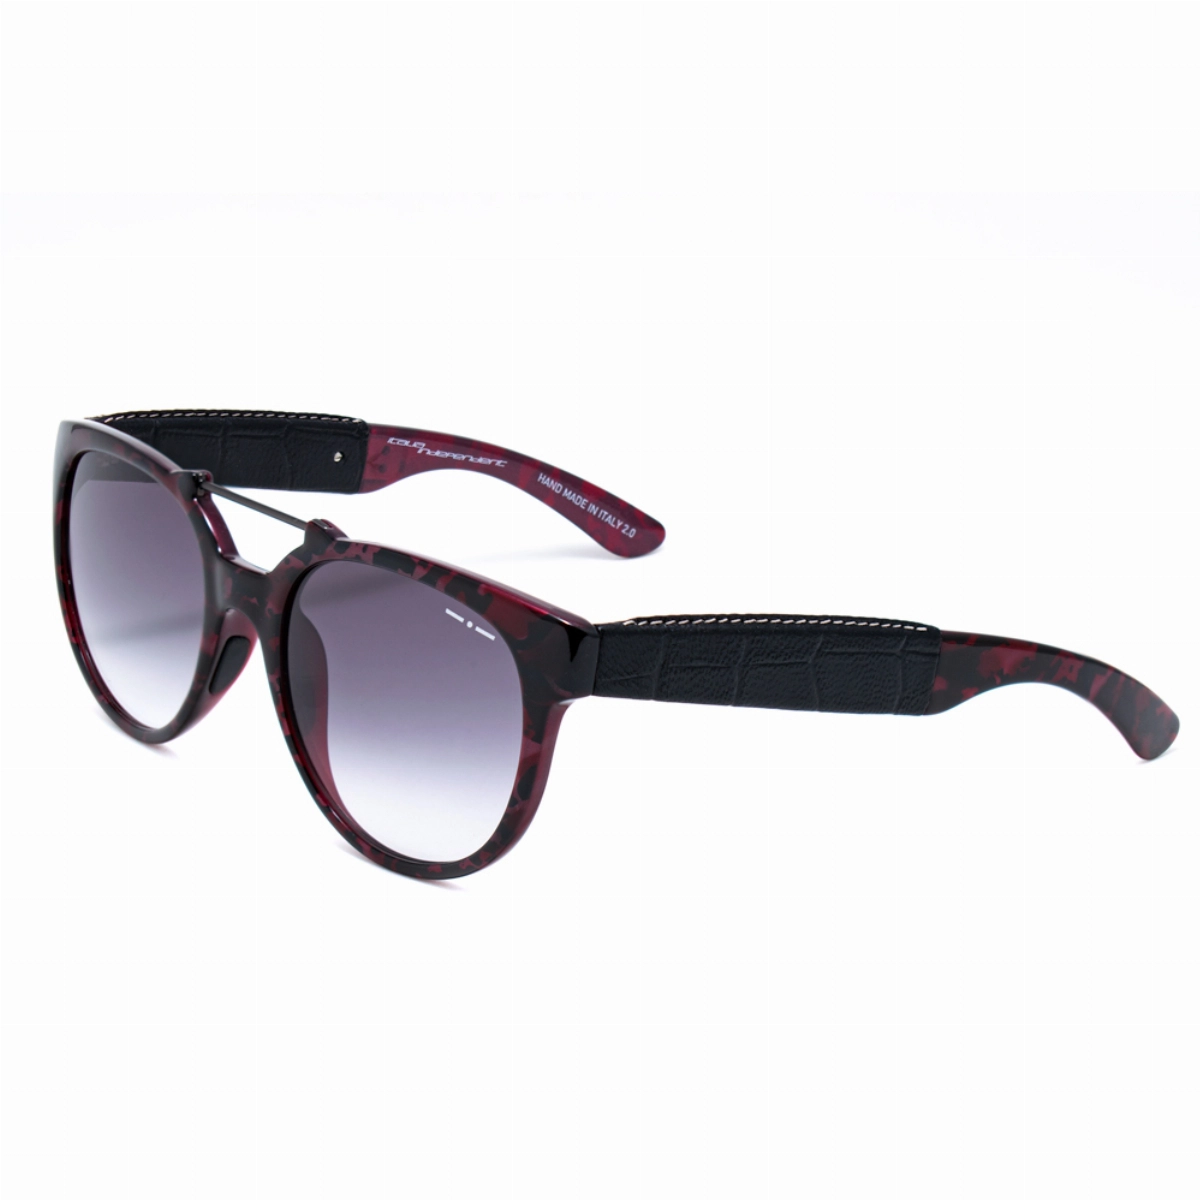 GLASSES OF WOMEN S ITALIA INDEPENDENT 0916Z-142-LTH